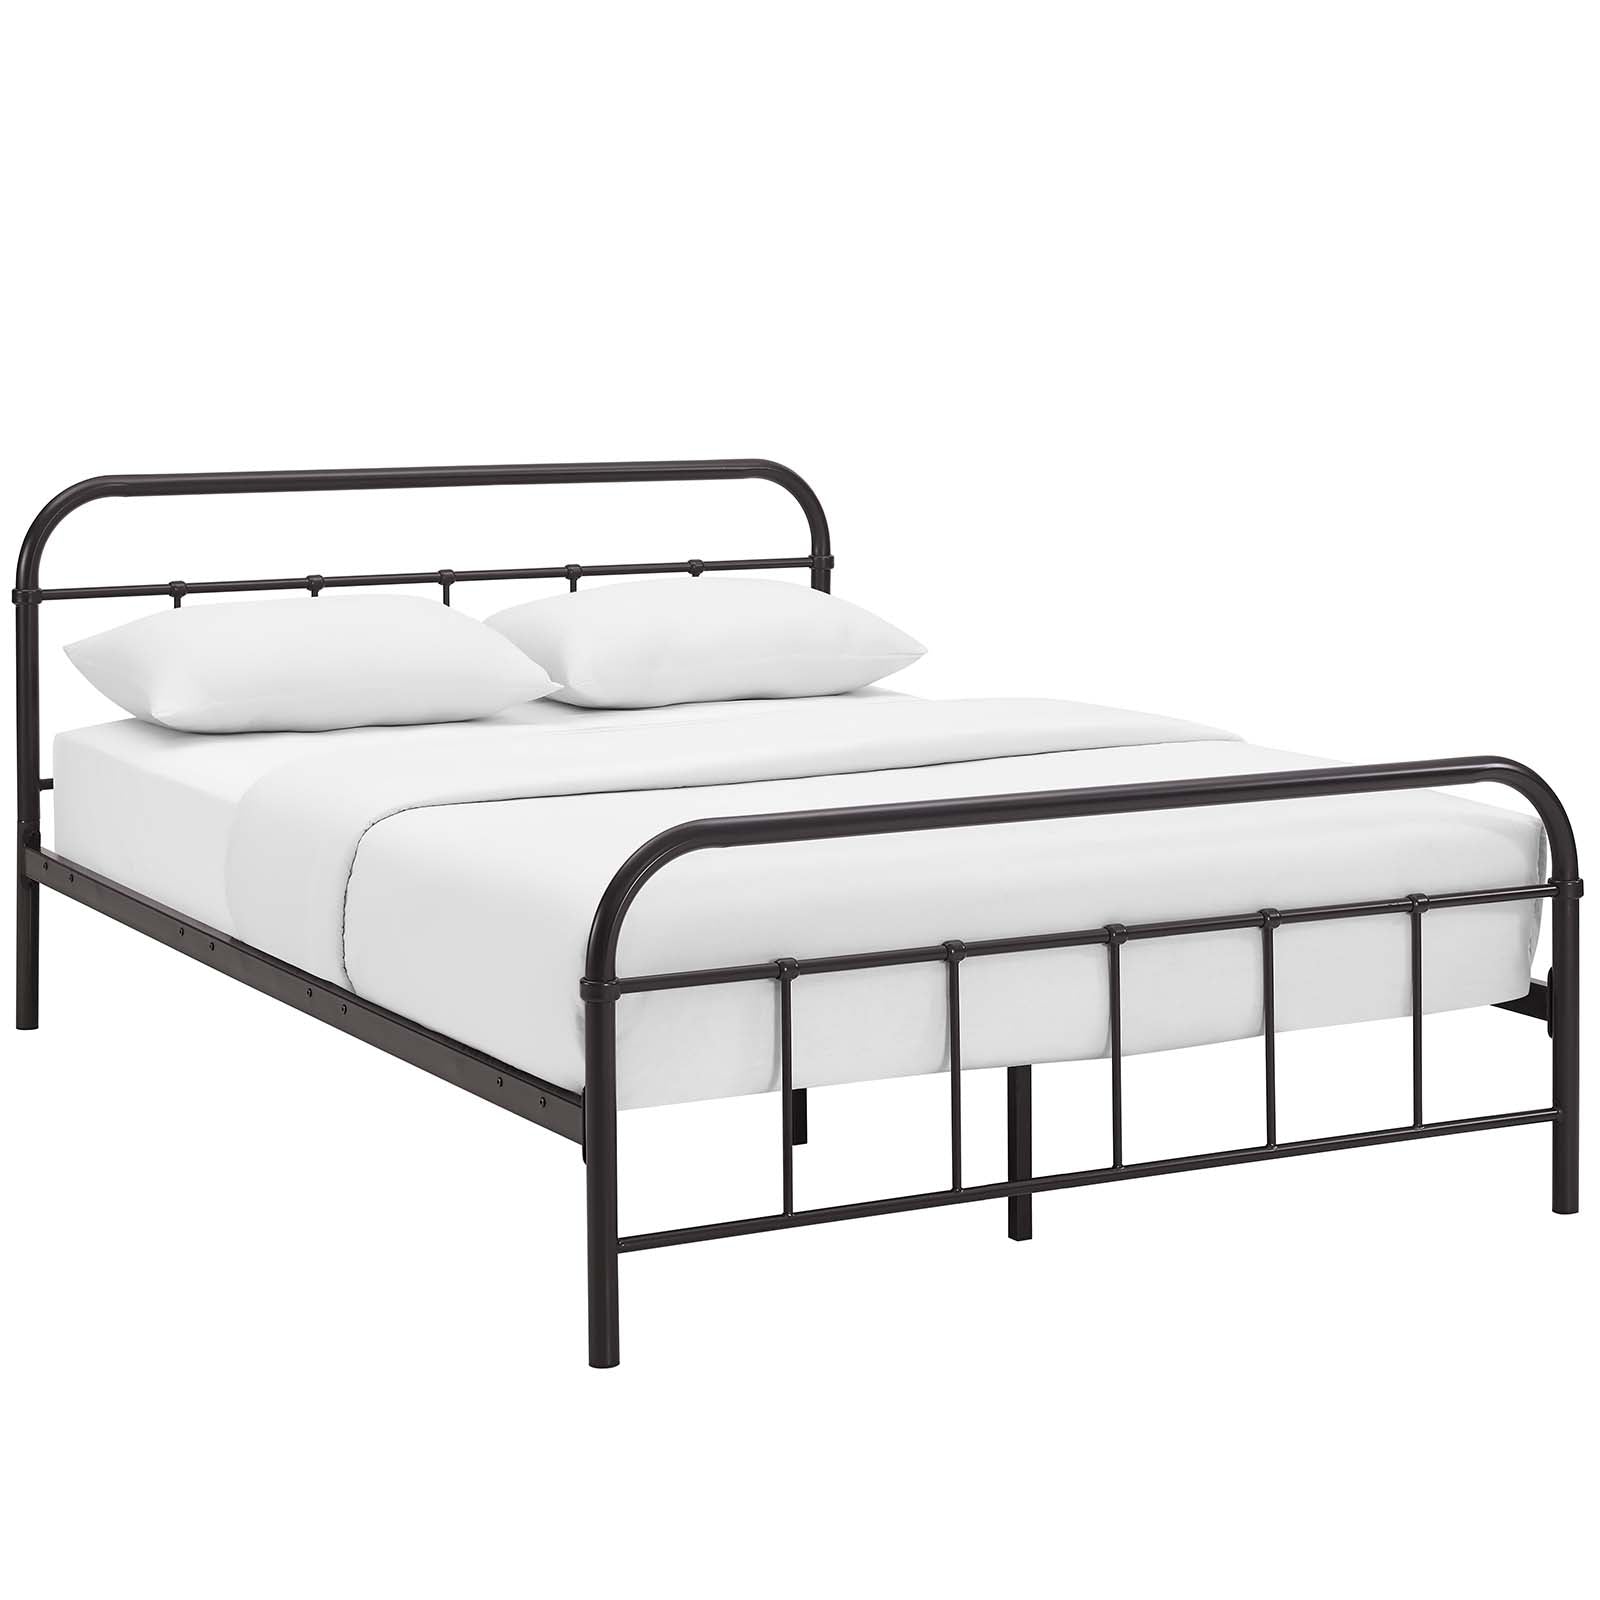 Modway Beds - Maisie Queen Stainless Steel Bed Frame Brown